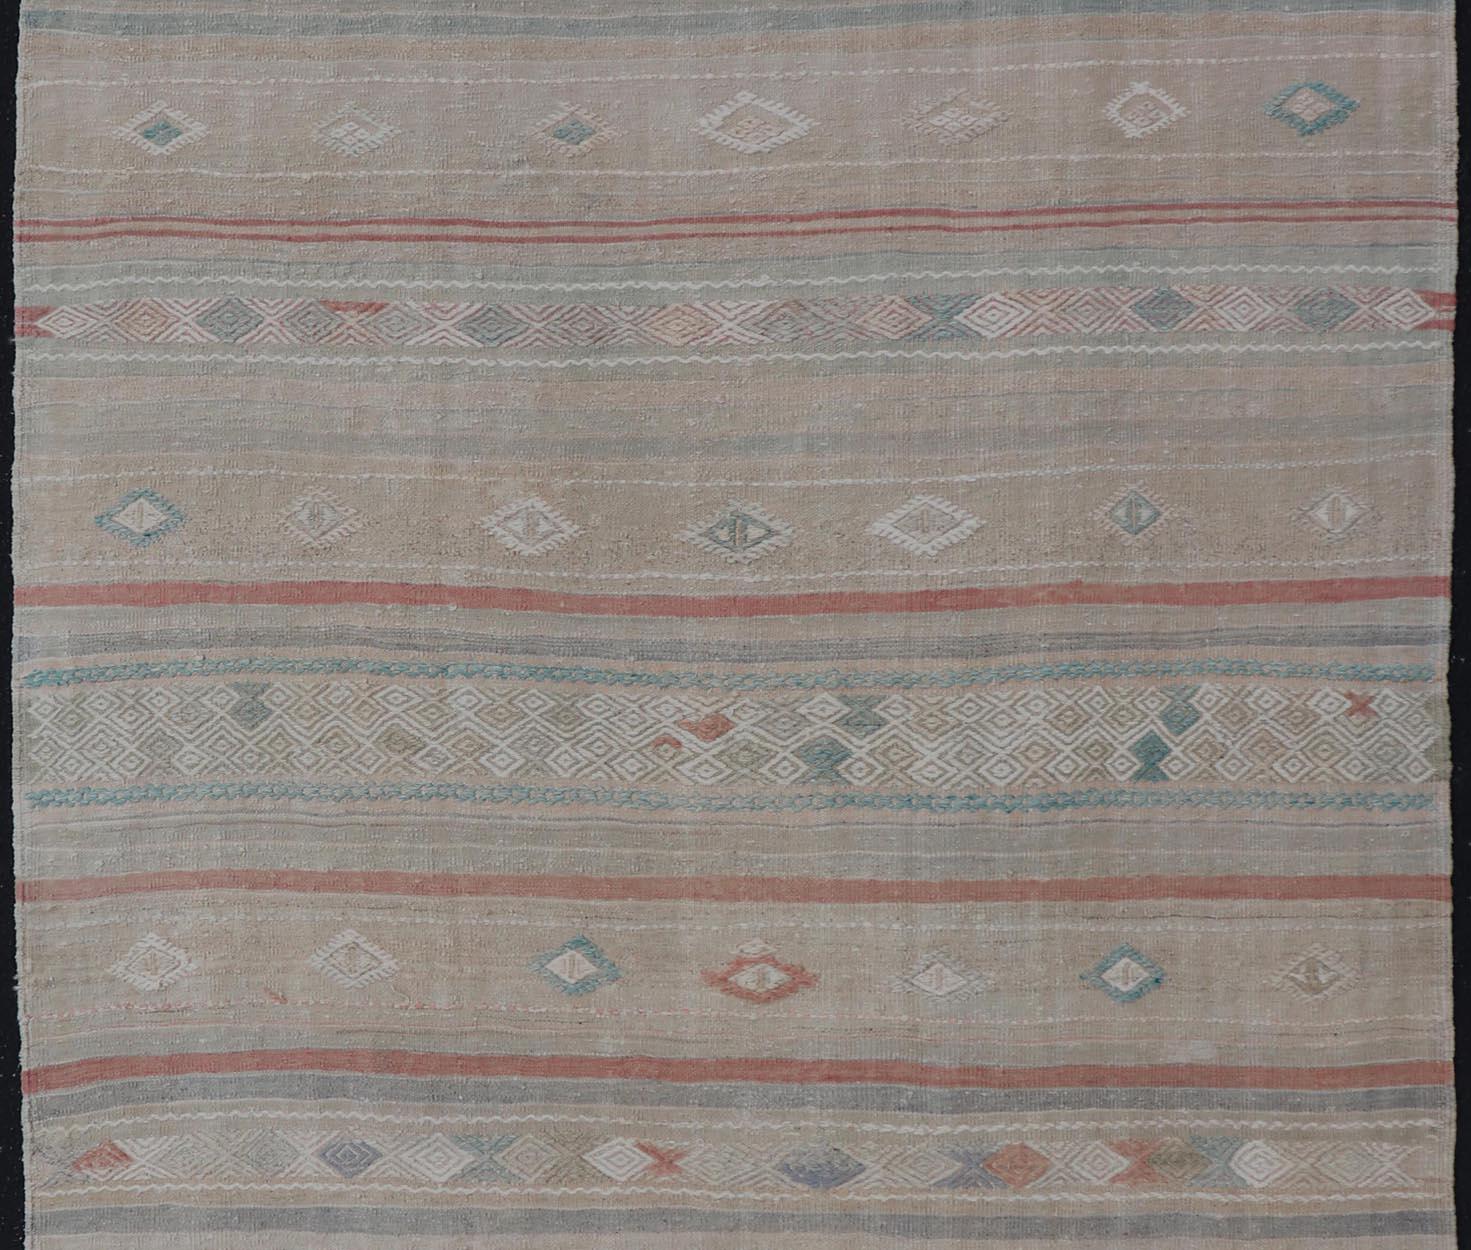 Turkish Flat-Weave Embroideries Kilim in Taupe, Green, Teal, Cream, and Brown For Sale 3